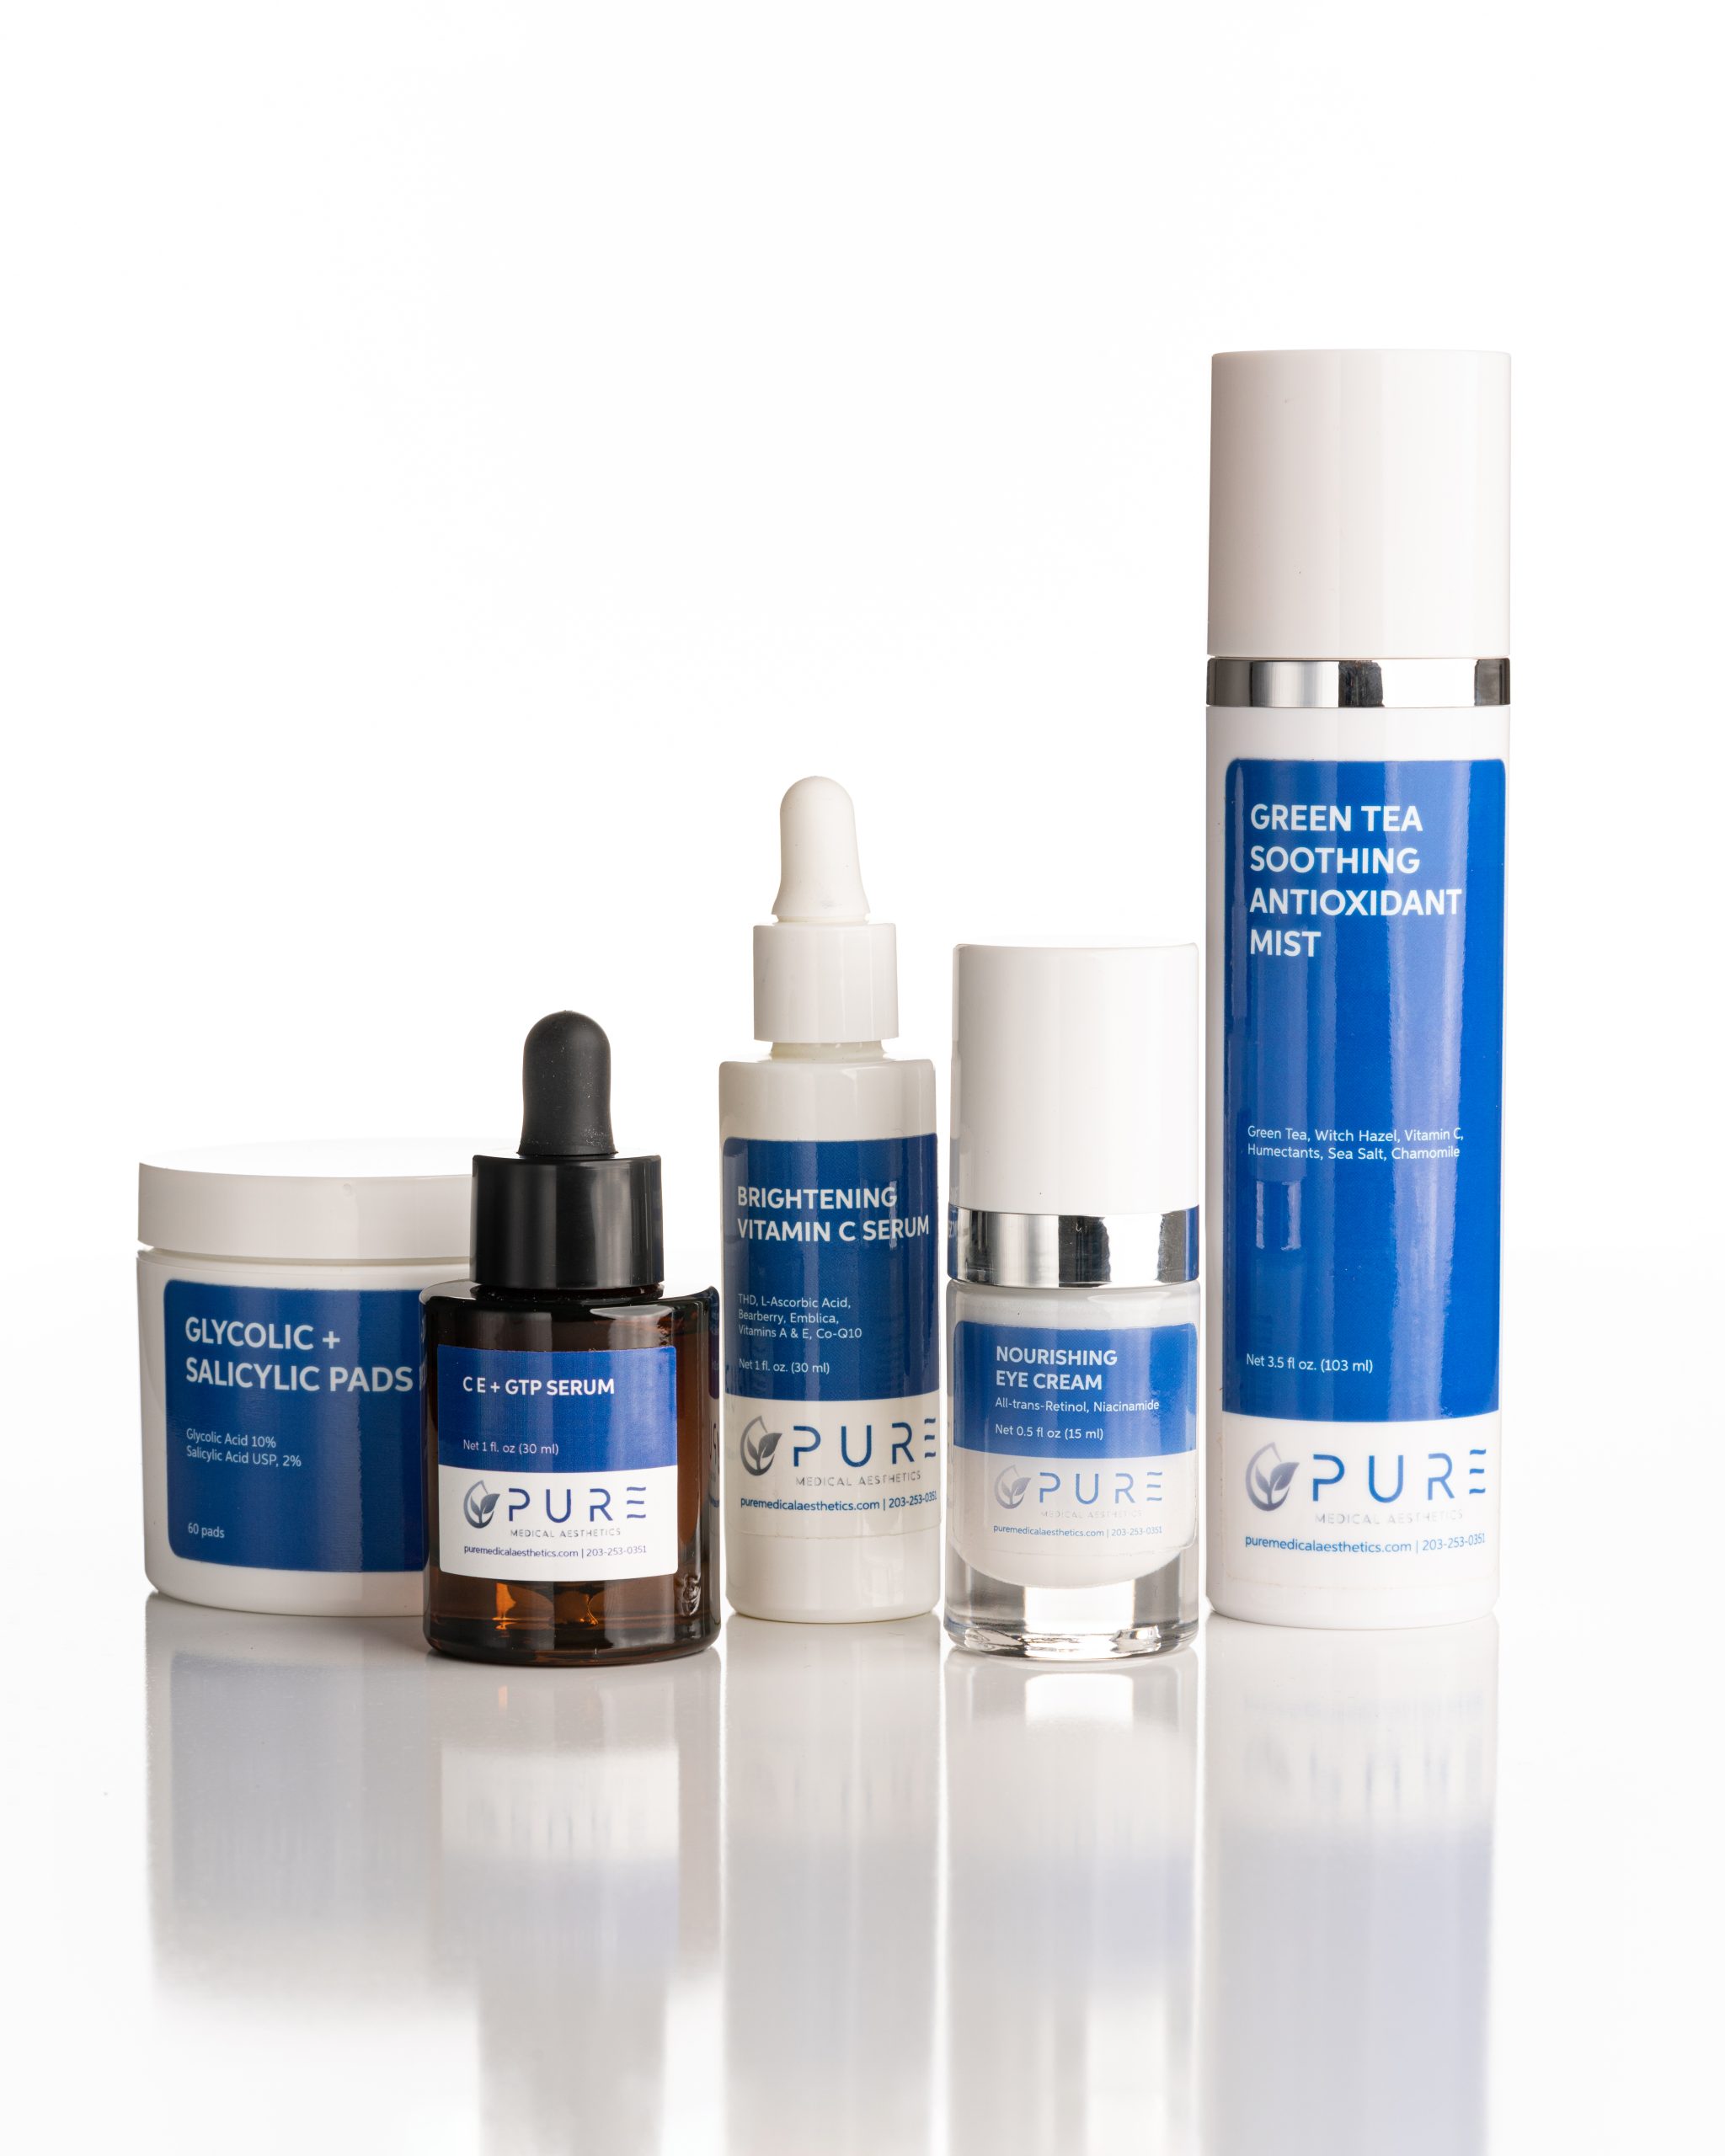 PURE Medical Aesthetics products